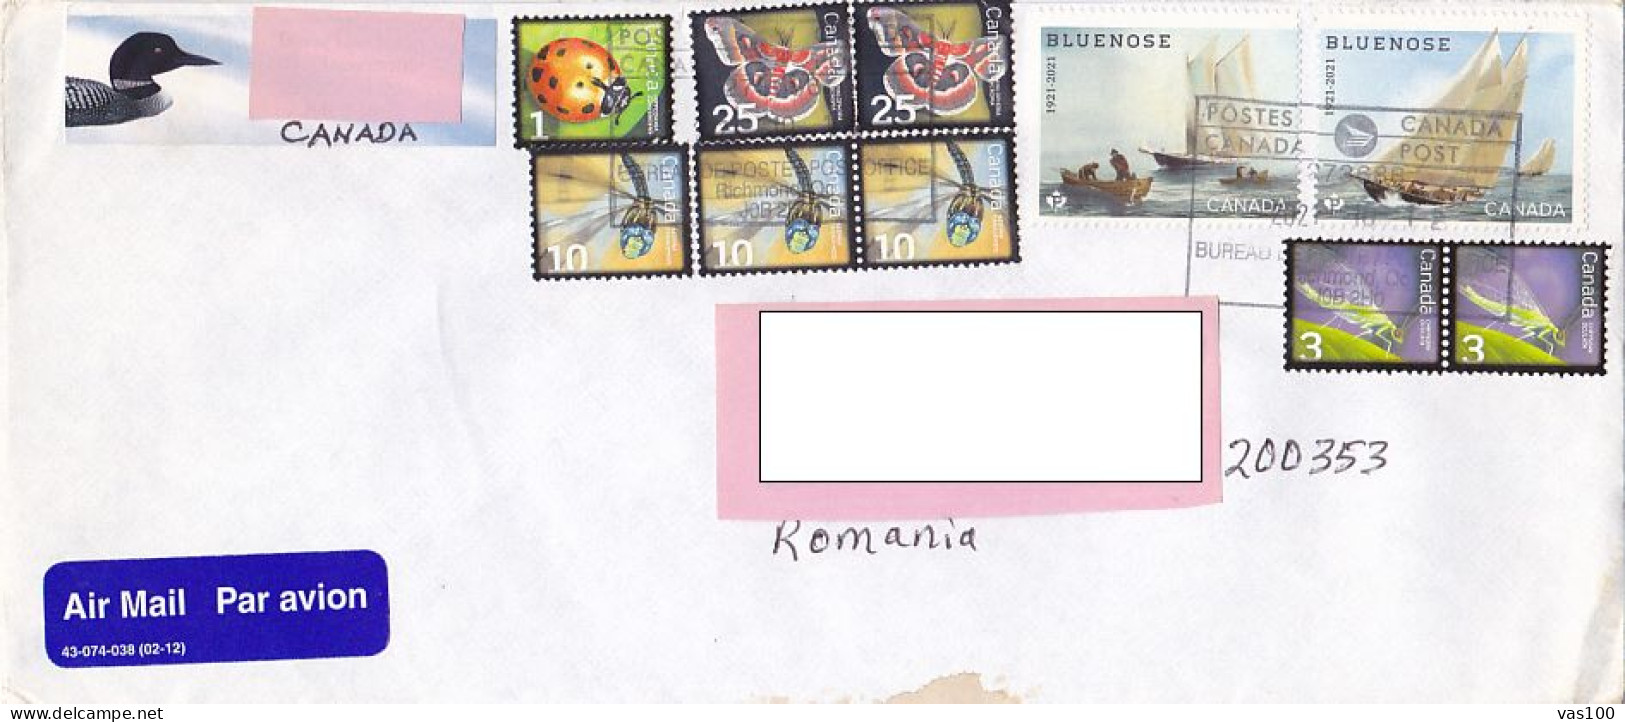 INSECTS, DRAGONFLY, BUTTERFLY, LADYBUG, LACEWING, SHIPS, STAMP ON COVER, 2021, CANADA - Covers & Documents